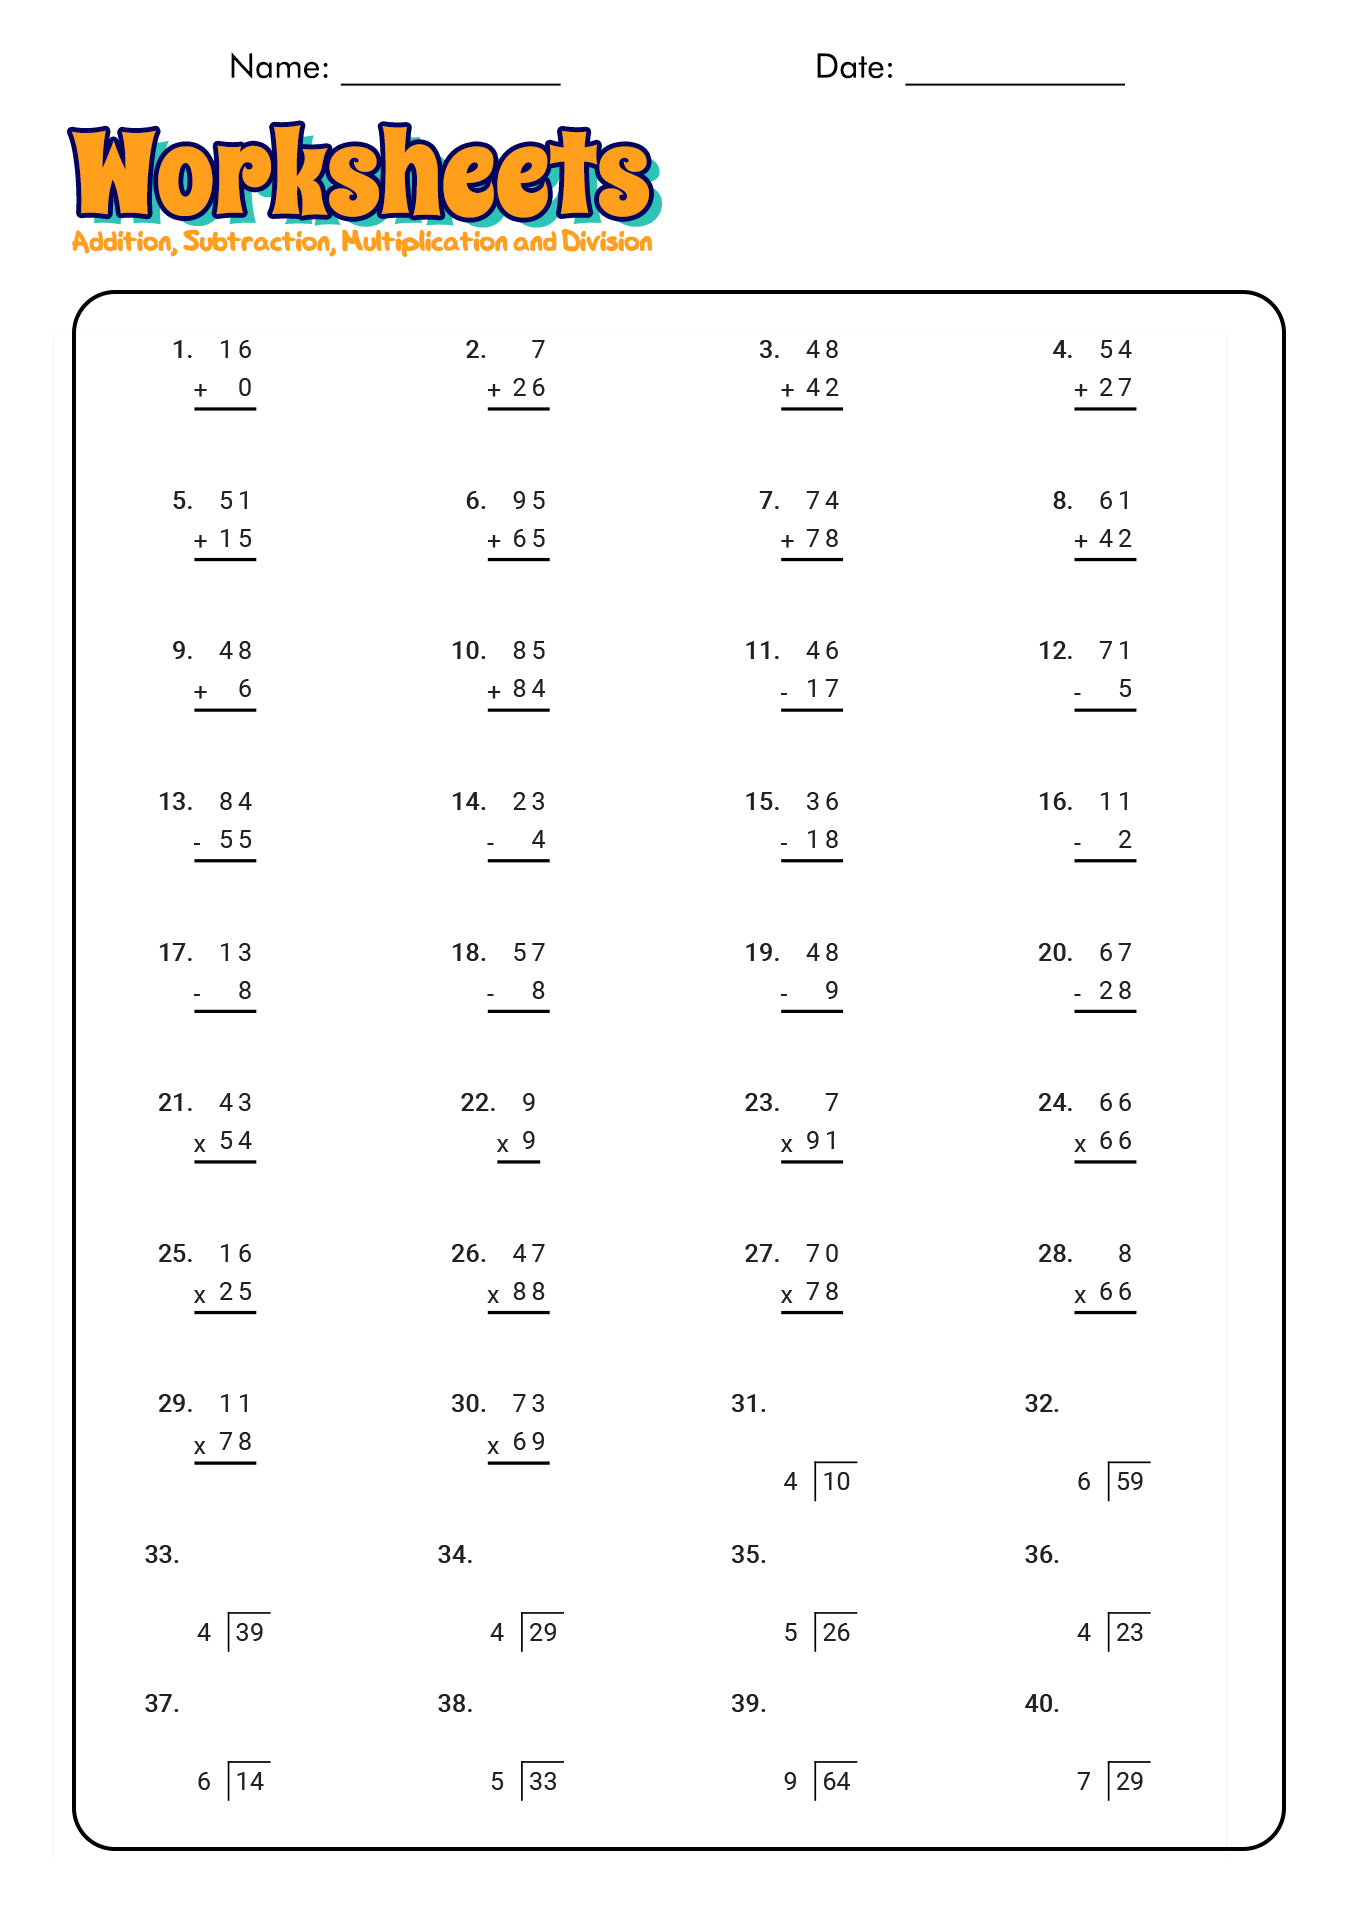 Addition Subtraction Multiplication and Division Worksheets Image